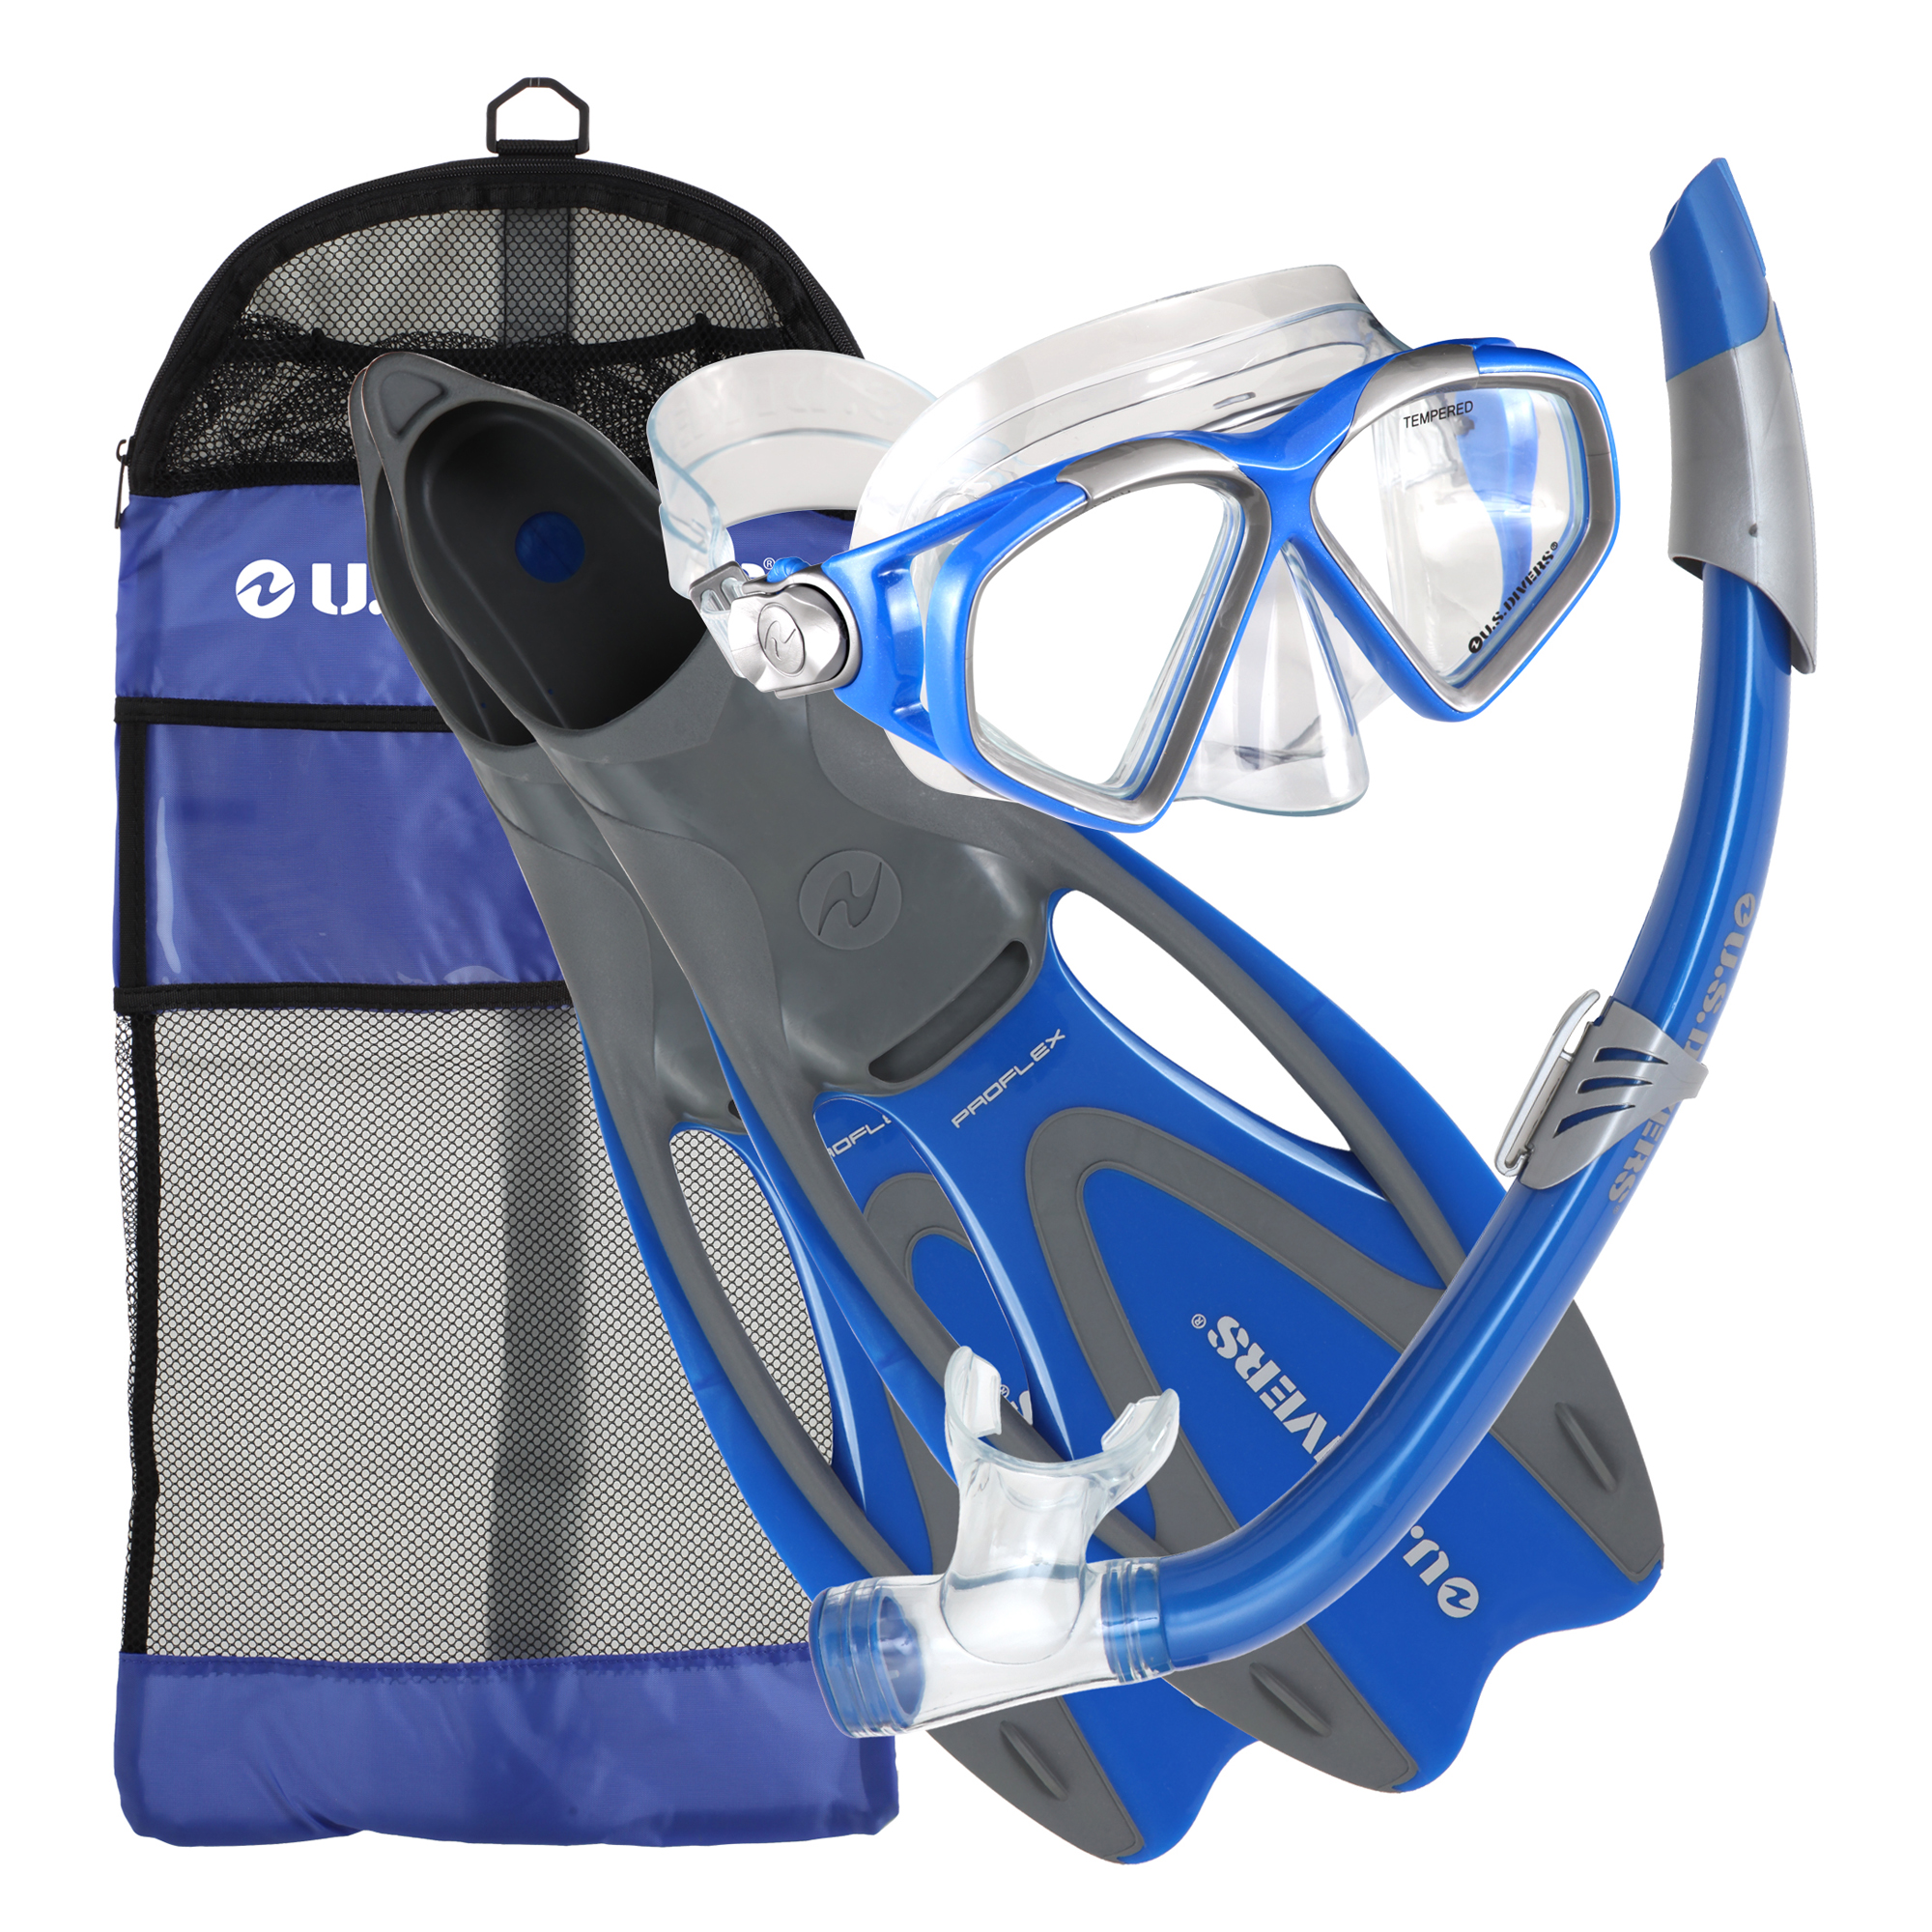 How to clean snorkel gear